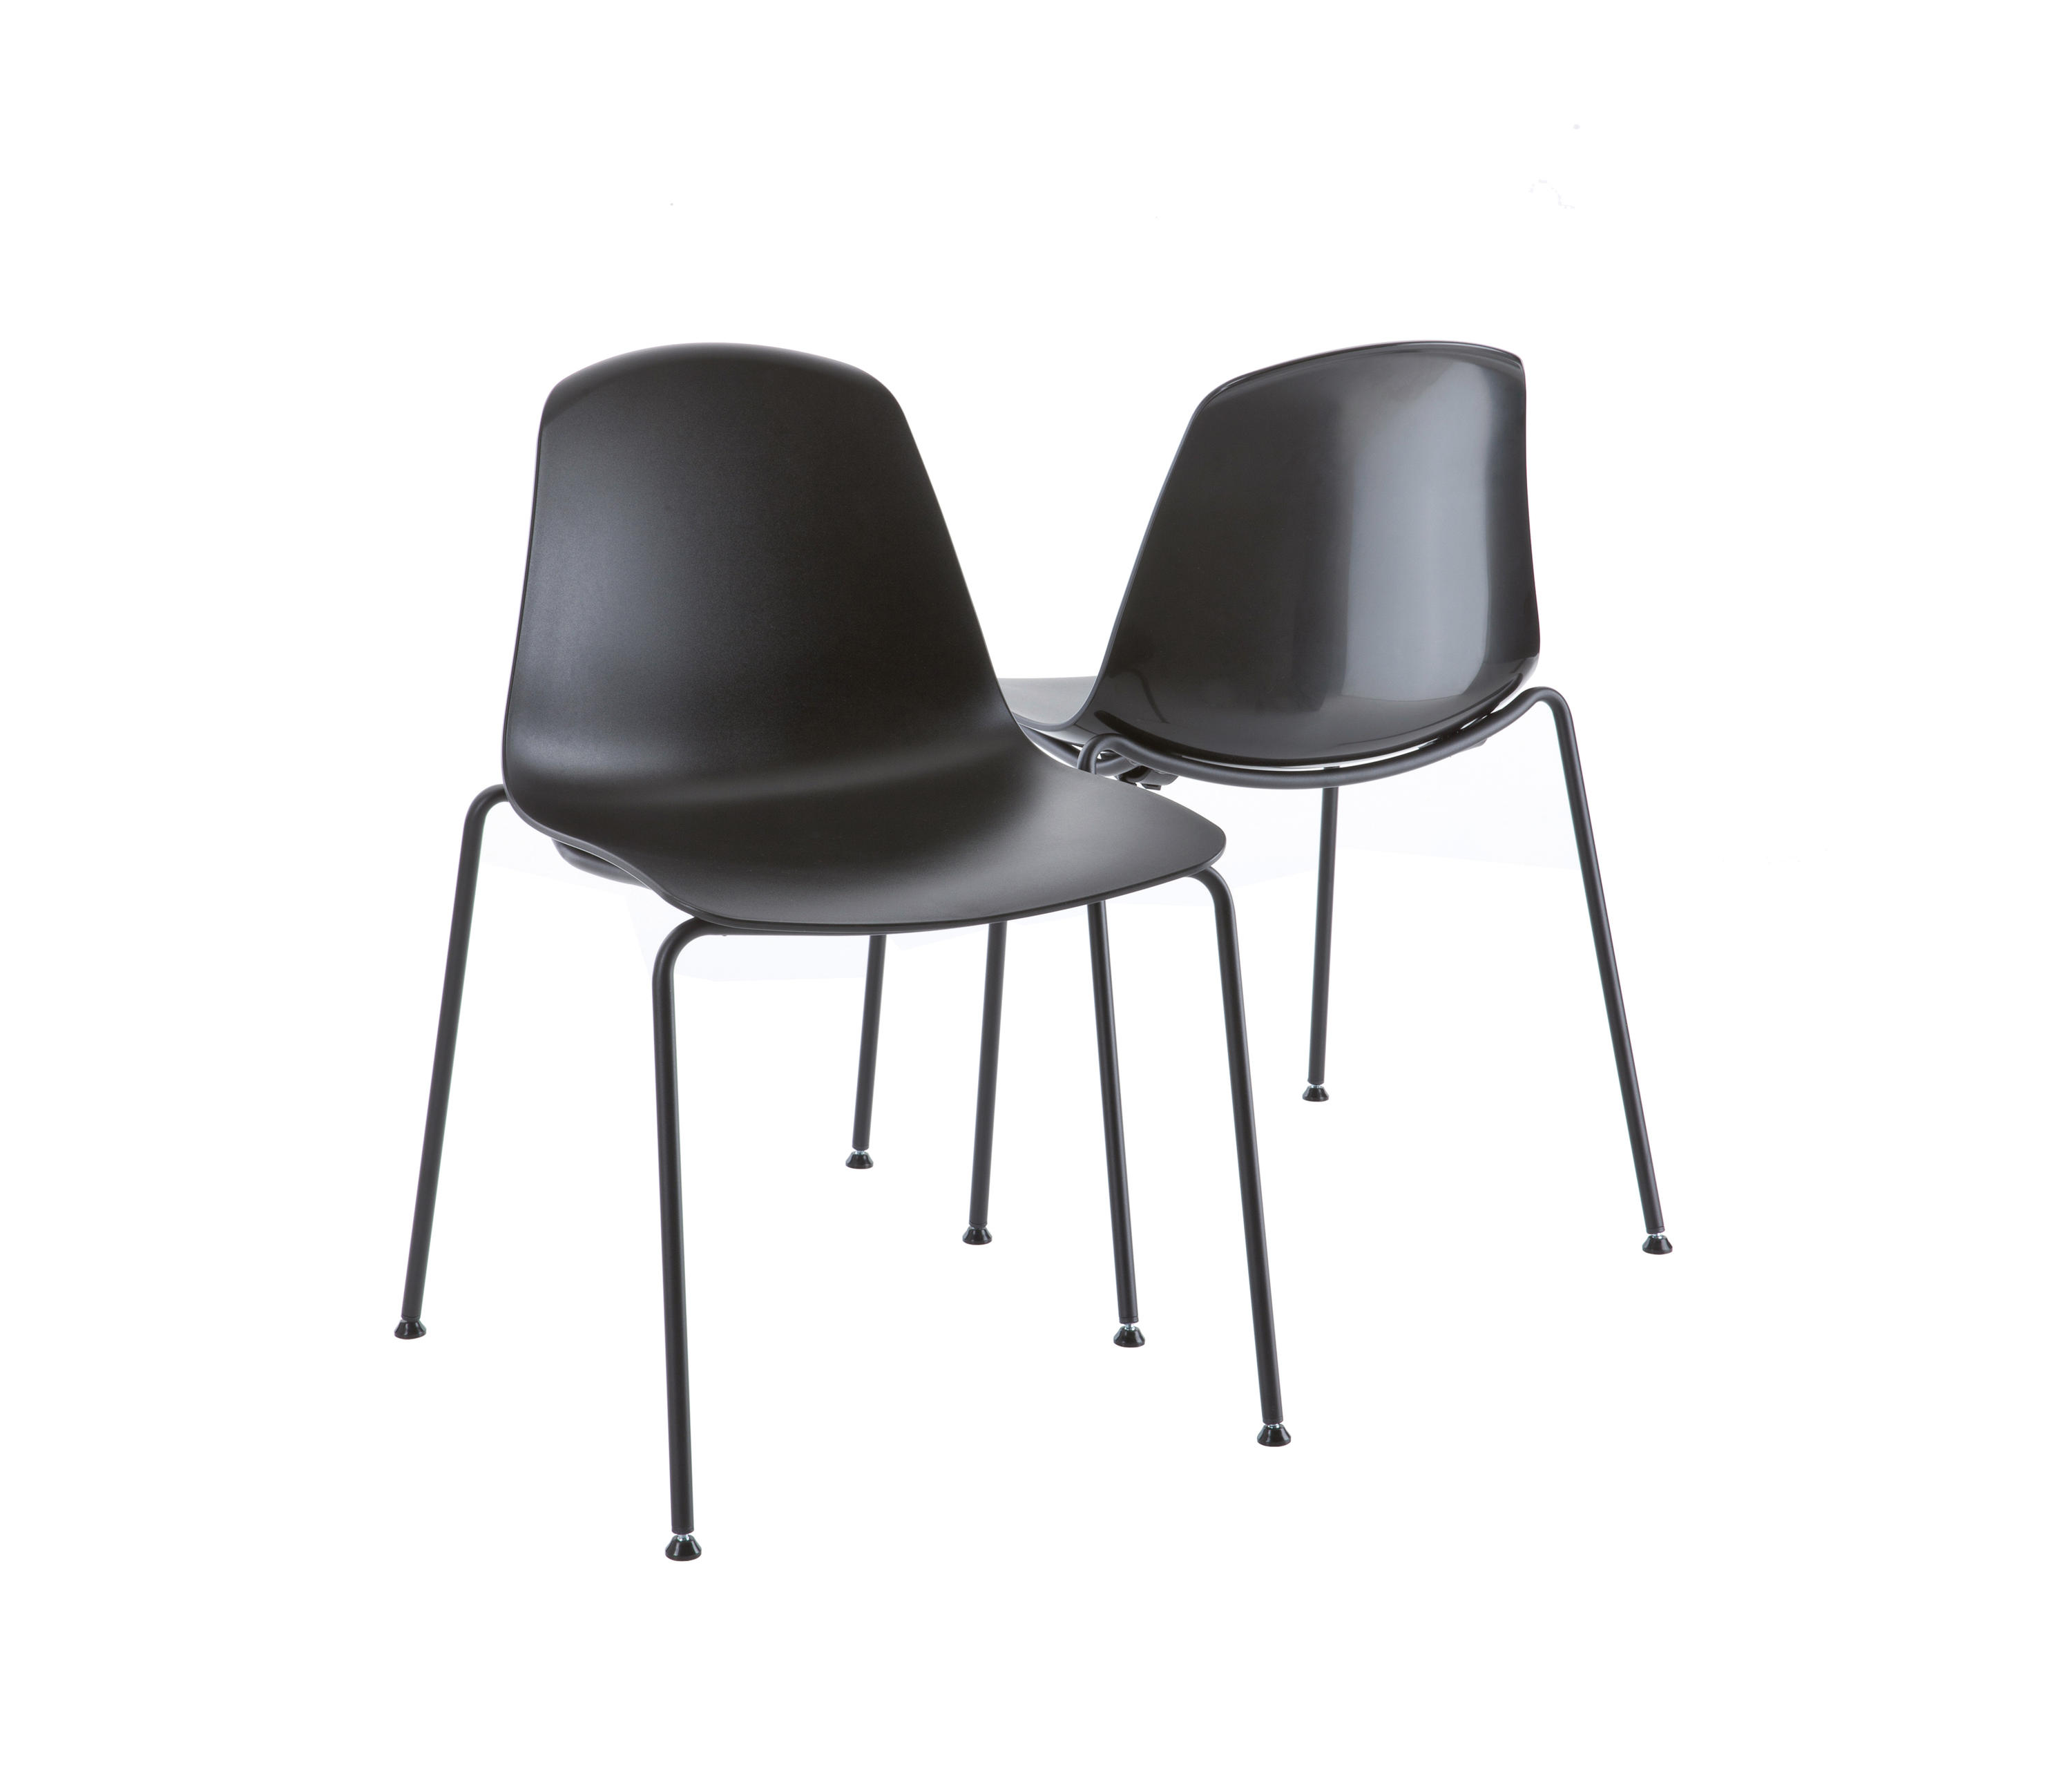 EPOCA EP1 - Chairs from Luxy | Architonic